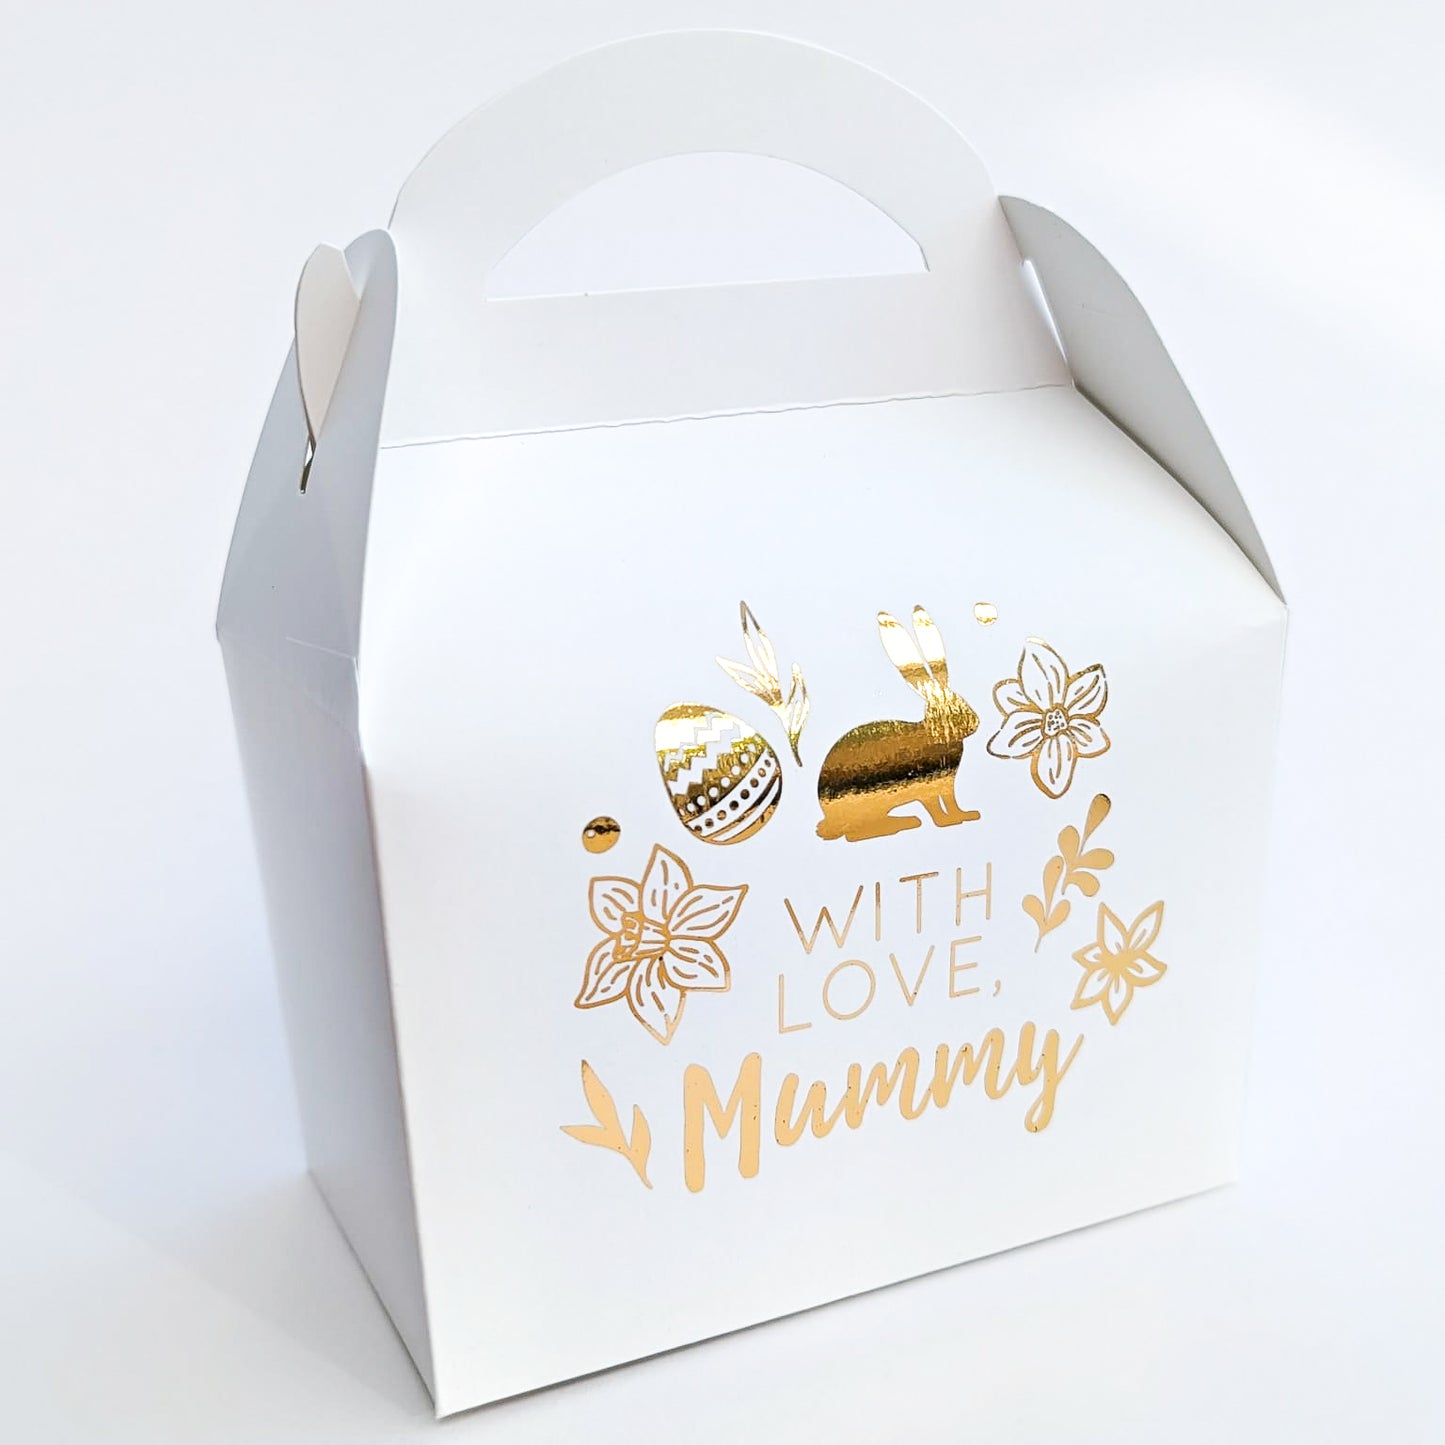 EASTER Spring Floral Gold Foil Personalised Treat Boxes Gift Bags